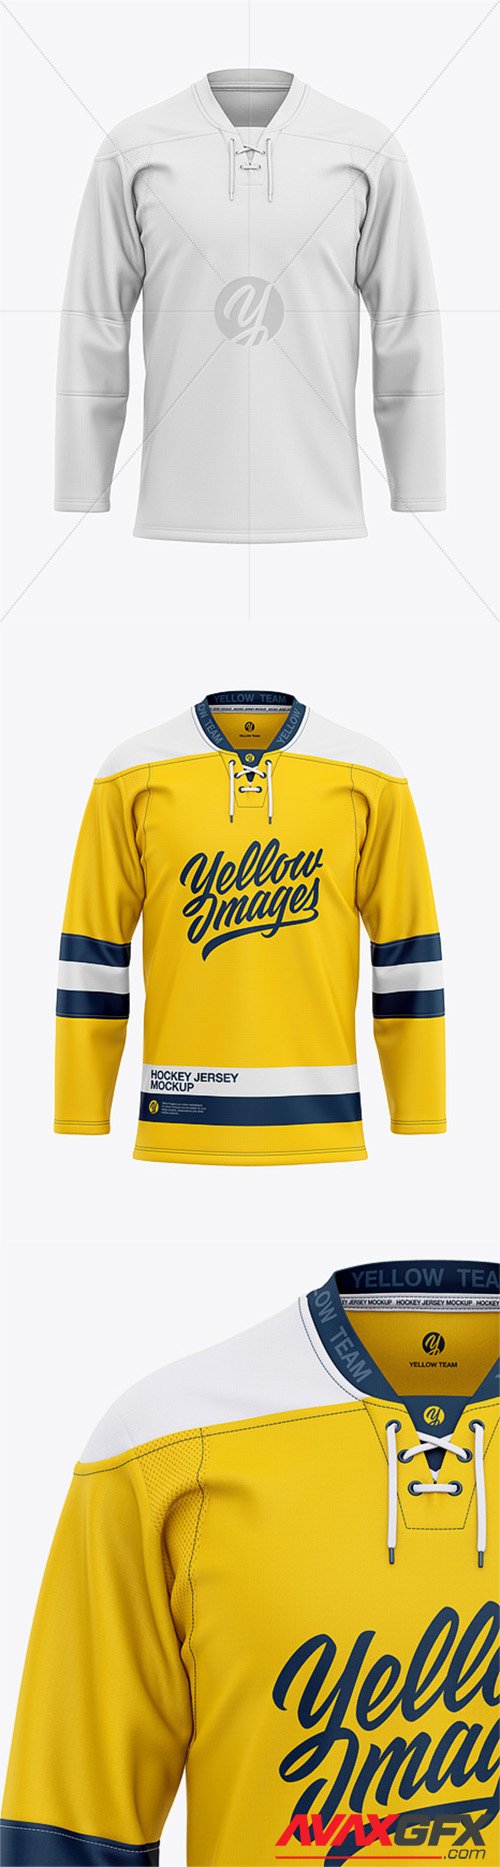 Download Men S Lace Neck Hockey Jersey Mockup Front View 40199 Avaxgfx All Downloads That You Need In One Place Graphic From Nitroflare Rapidgator